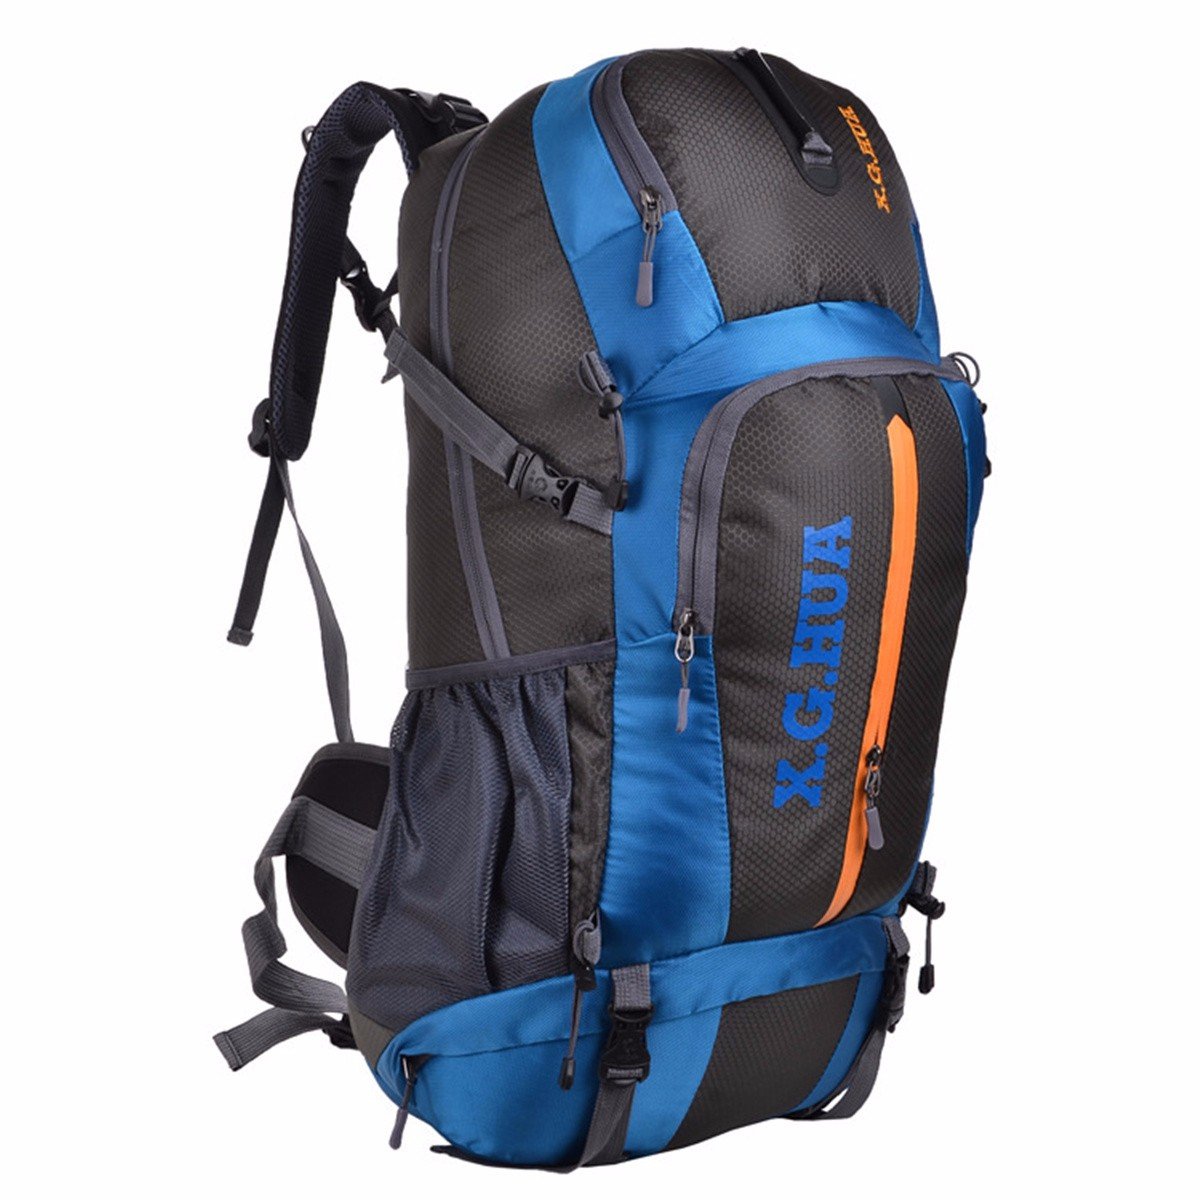 50L Outdoor Camping Hiking Traveling Mountaineering Backpack